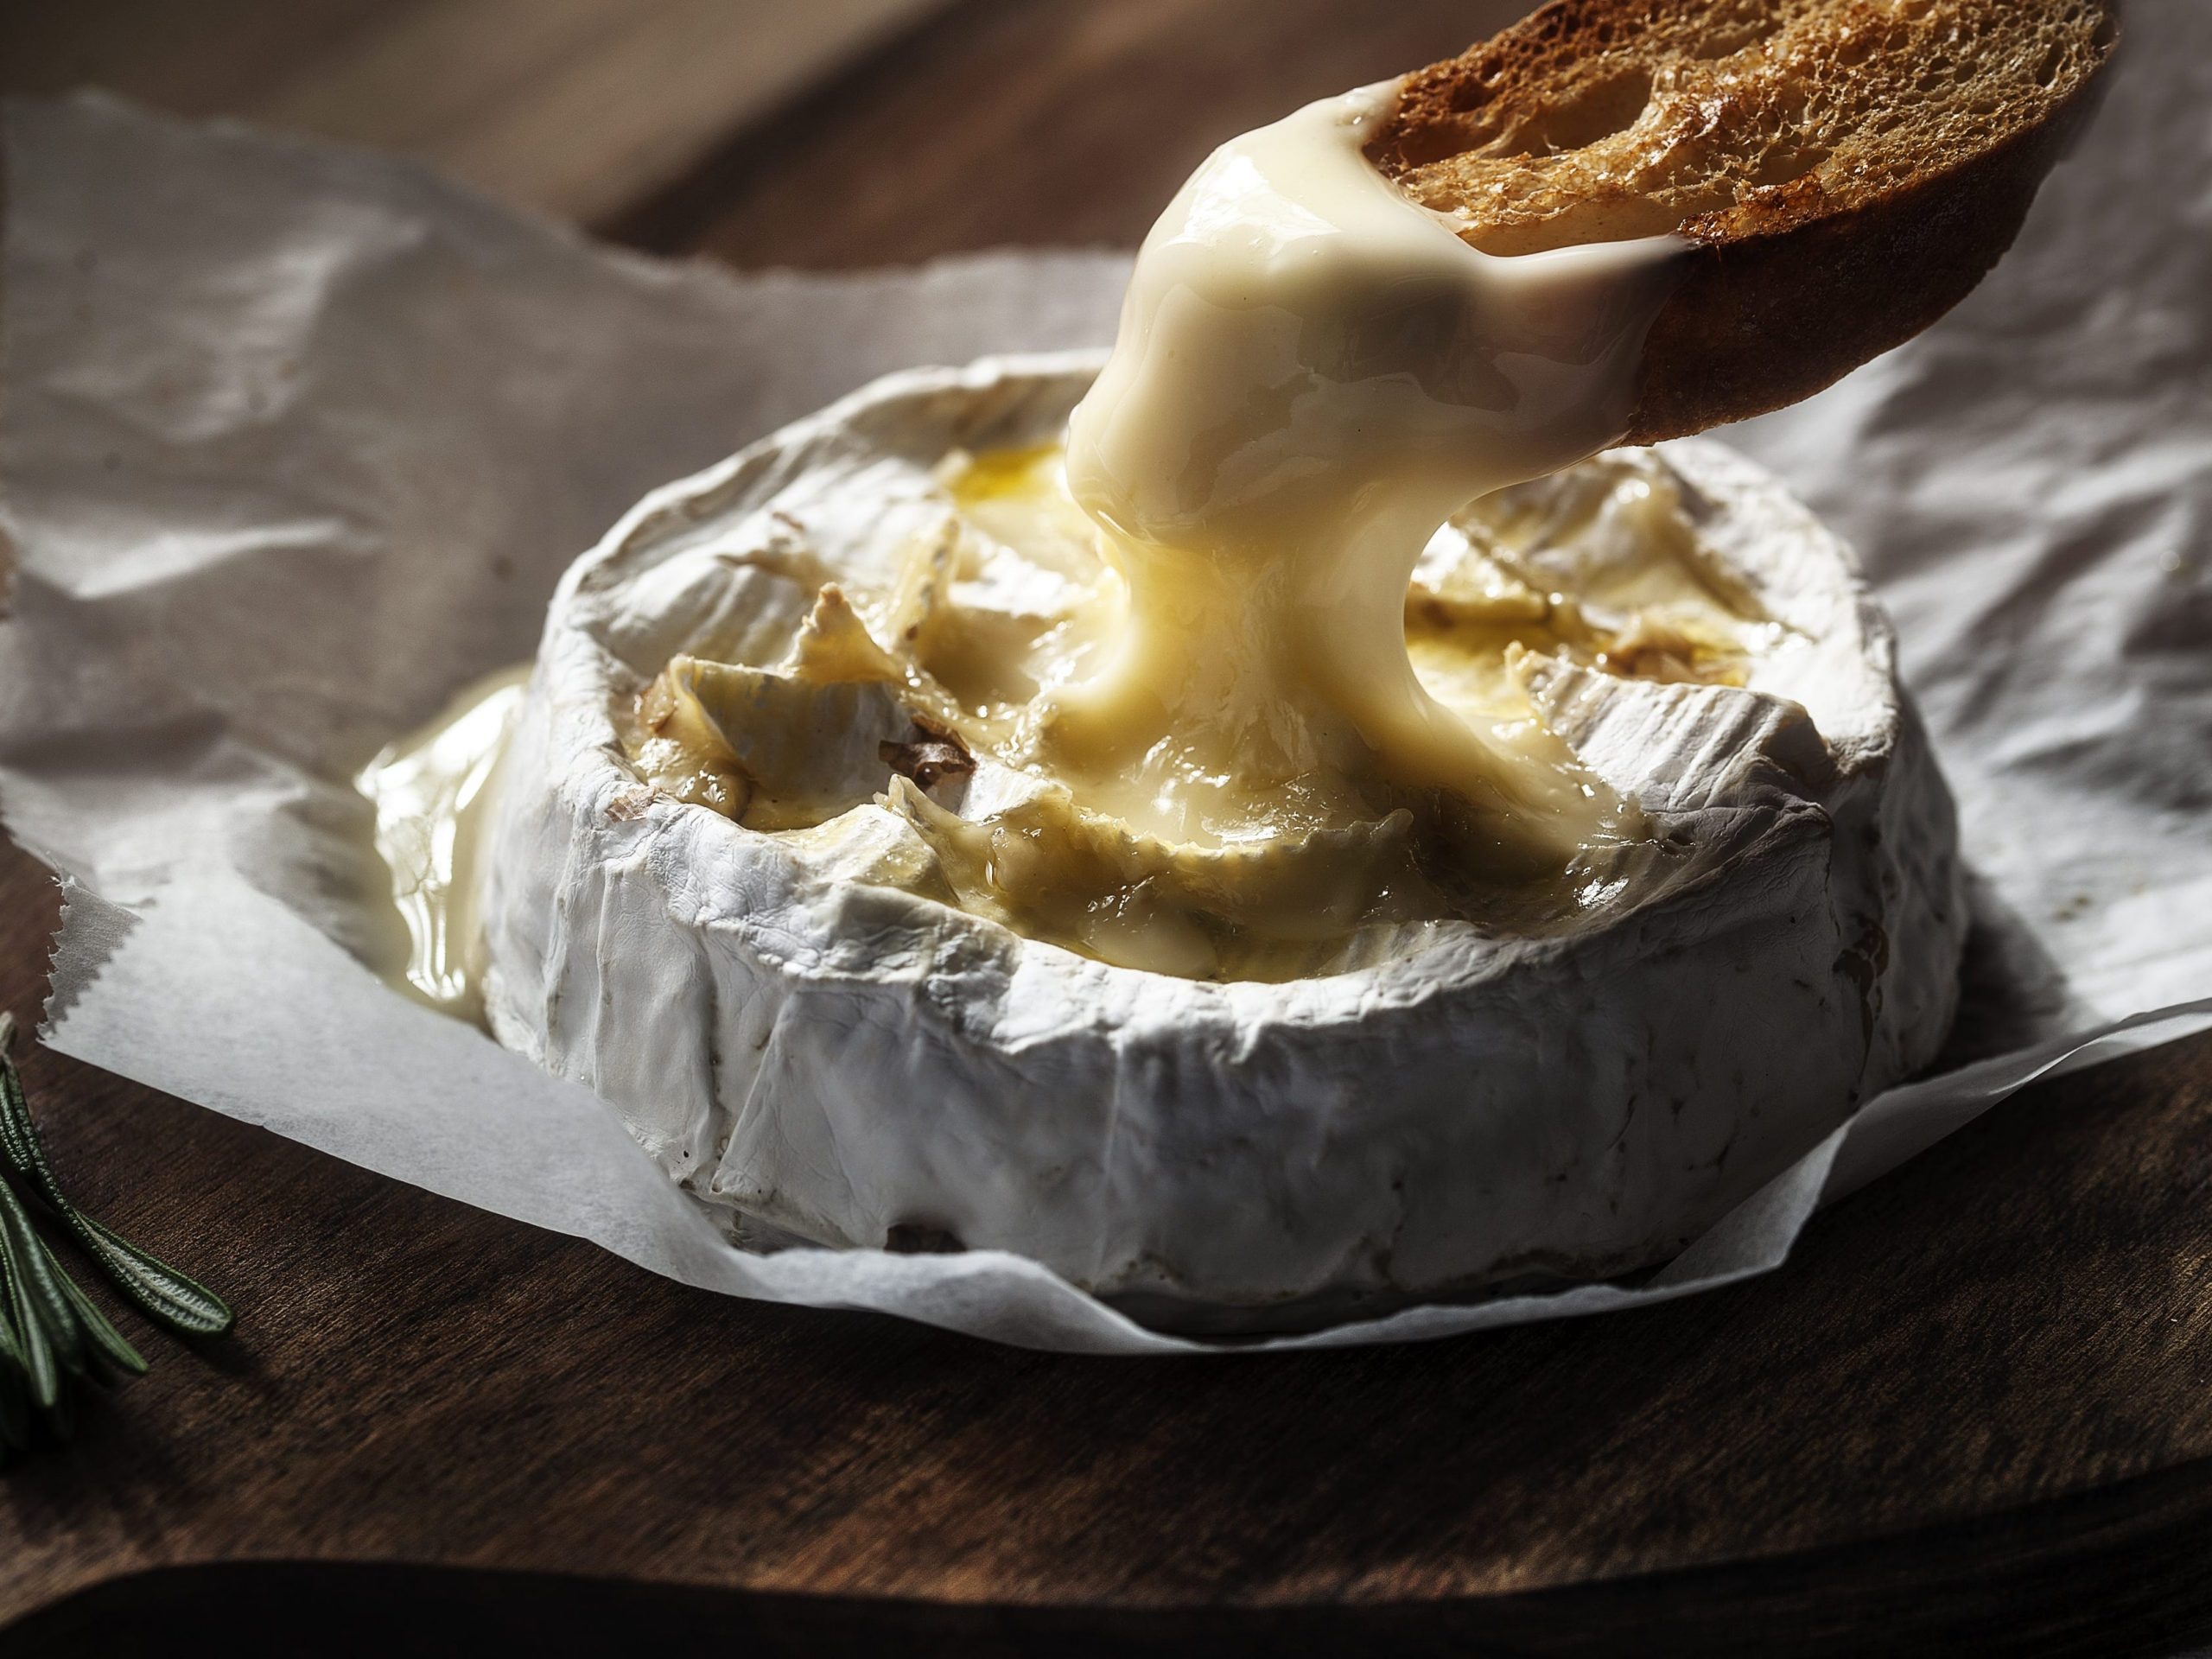 A crostini being dipped into a gooey wheel of camembert cheese